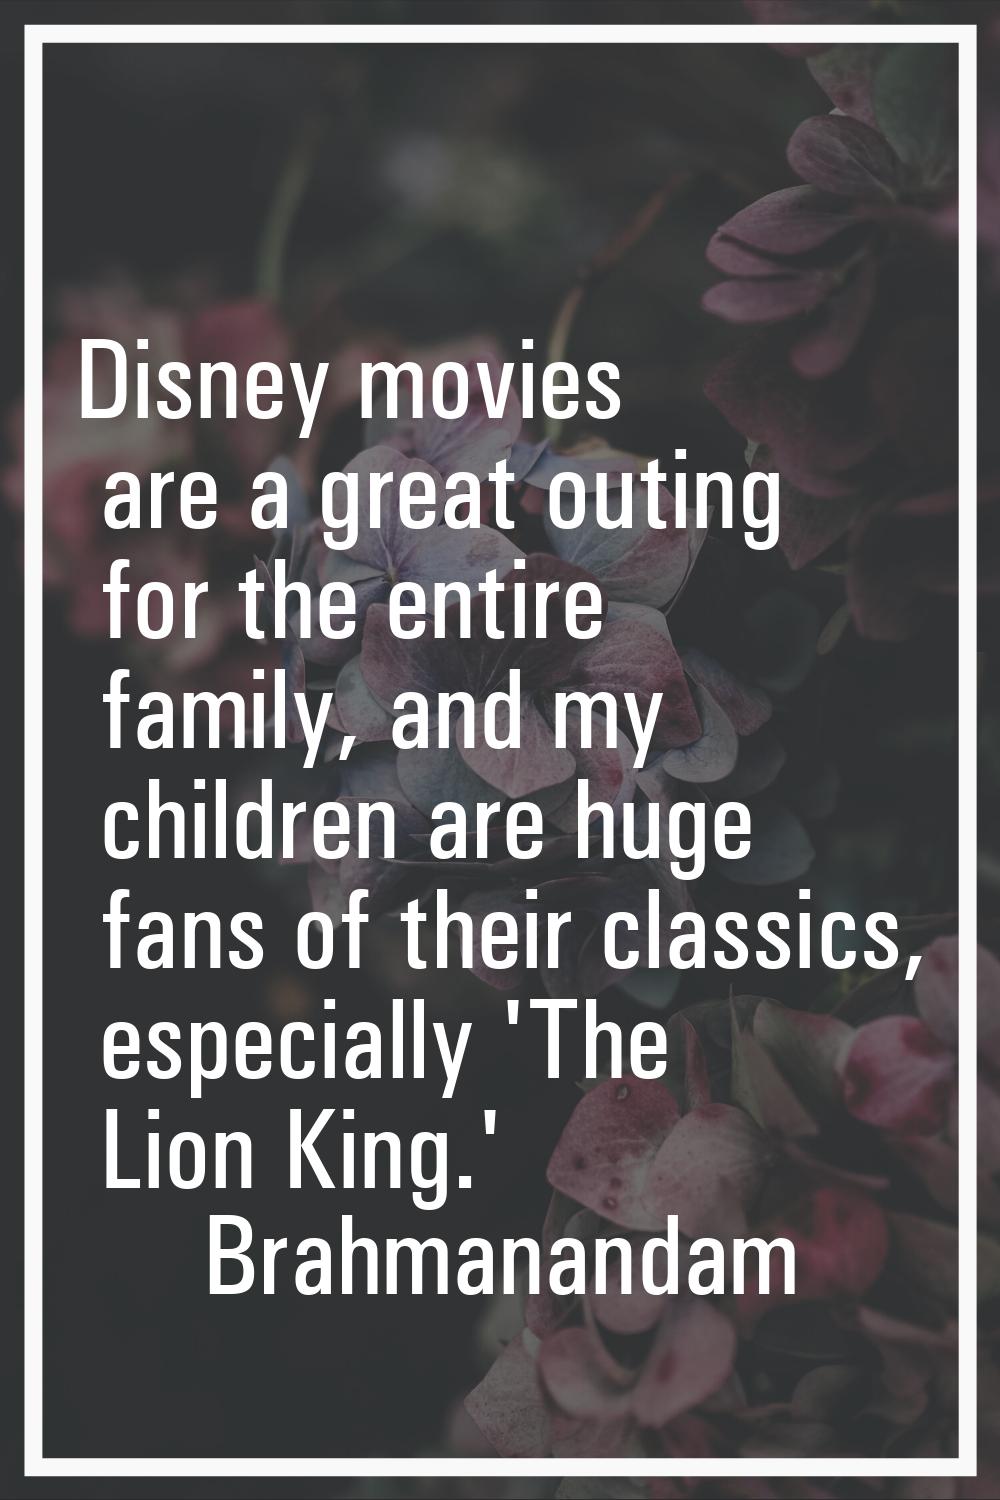 Disney movies are a great outing for the entire family, and my children are huge fans of their clas